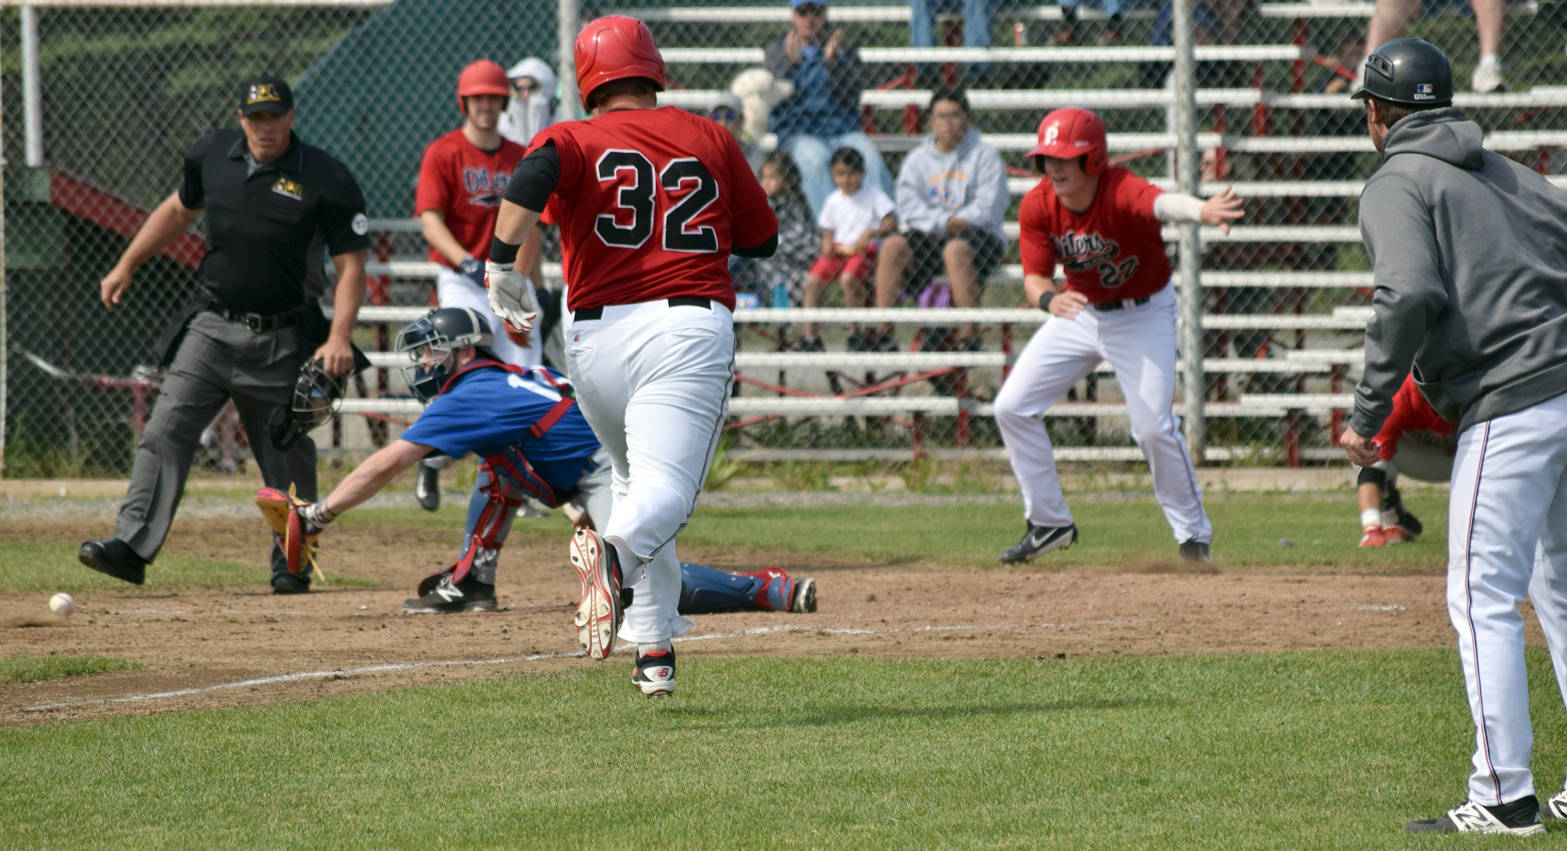 Glacier Pilots catcher Carter Bins prepares to collect the ball and swipe a successful tag on Jeremy Conant of the Oilers on Sunday, June 25, 2017, at Coral Seymour Memorial Park in Kenai. While Conant was out, Kellen Strahm (22) and Oliver Dunn had scored before him to provide the difference in a 2-1 victory. (Photo by Jeff Helminiak/Peninsula Clarion)